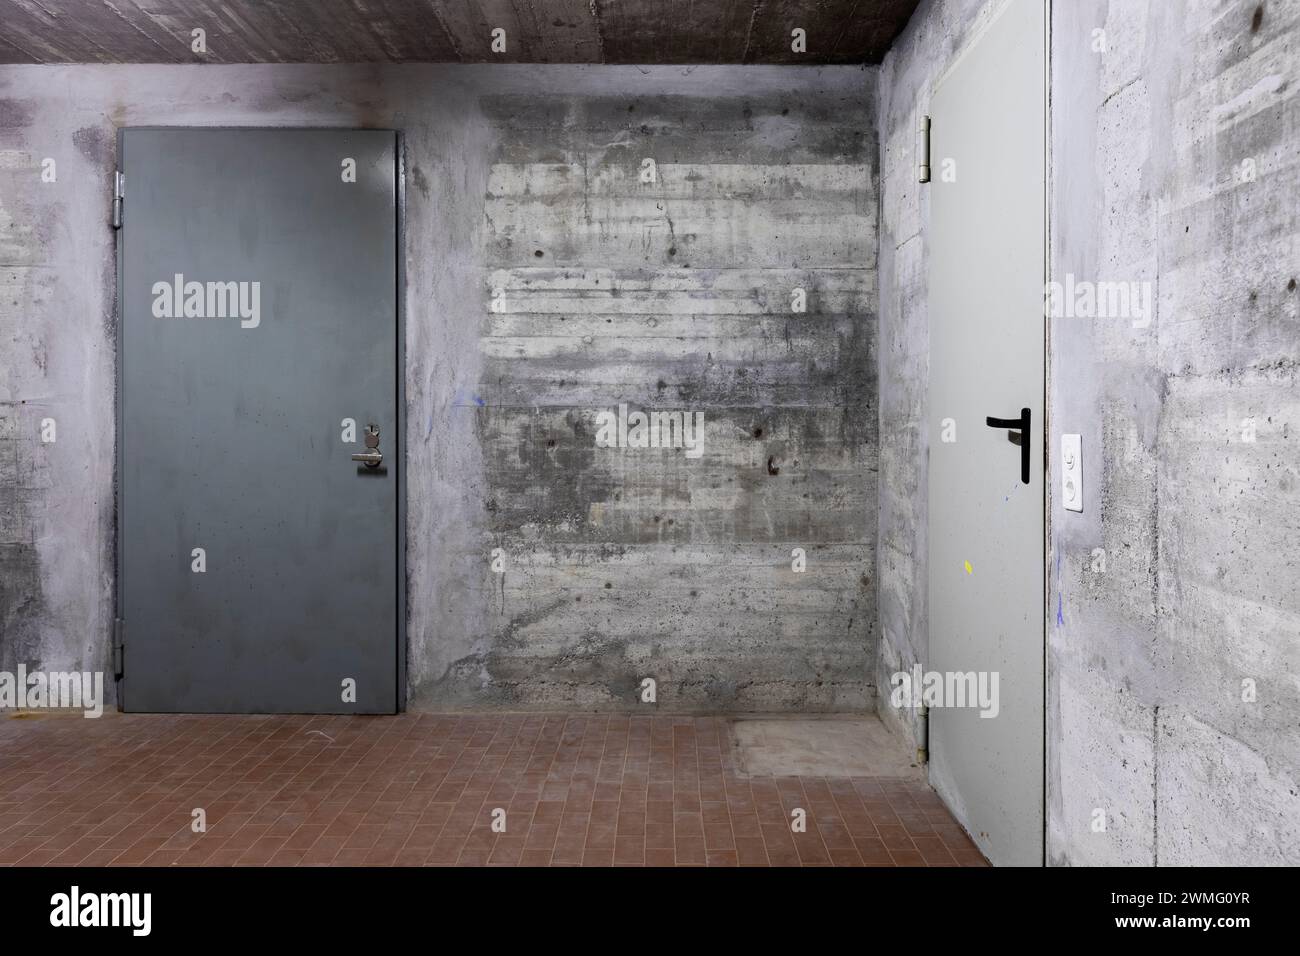 Front view of reinforced concrete wall of a bunker with closed armored door. Scene illuminated by a white neon lamp. Nobody inside Stock Photo